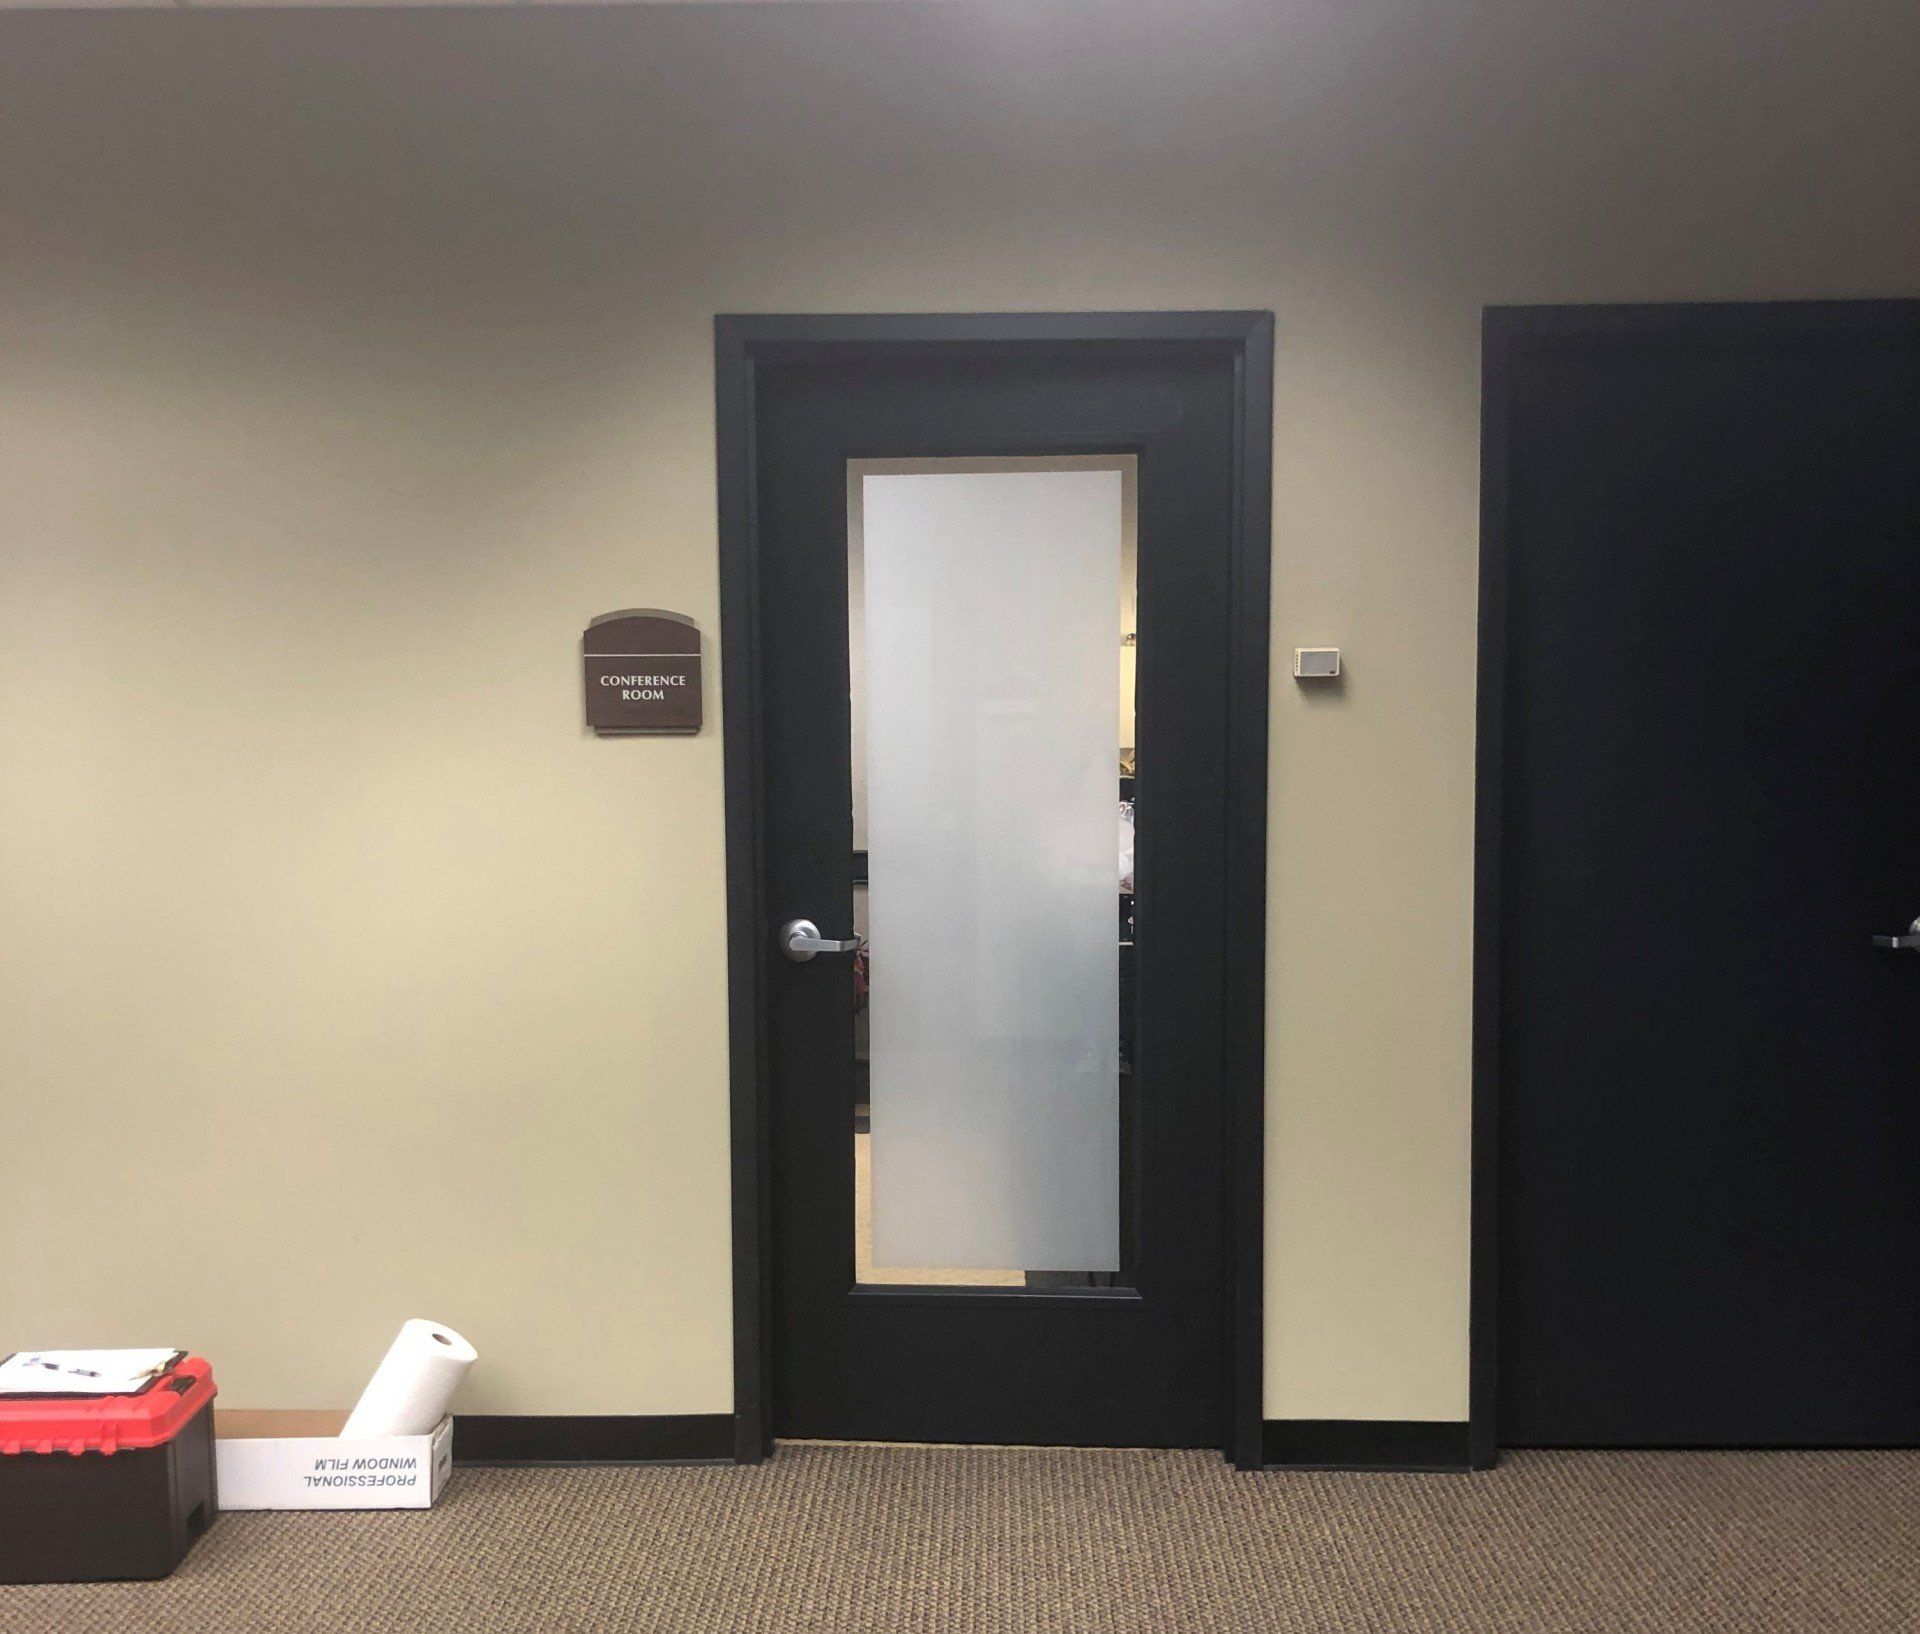 Decorative White Frost installed adding privacy and climate insulation on 12.12.2019 - Interior office tint at Palomar Insurance in Montgomery, AL